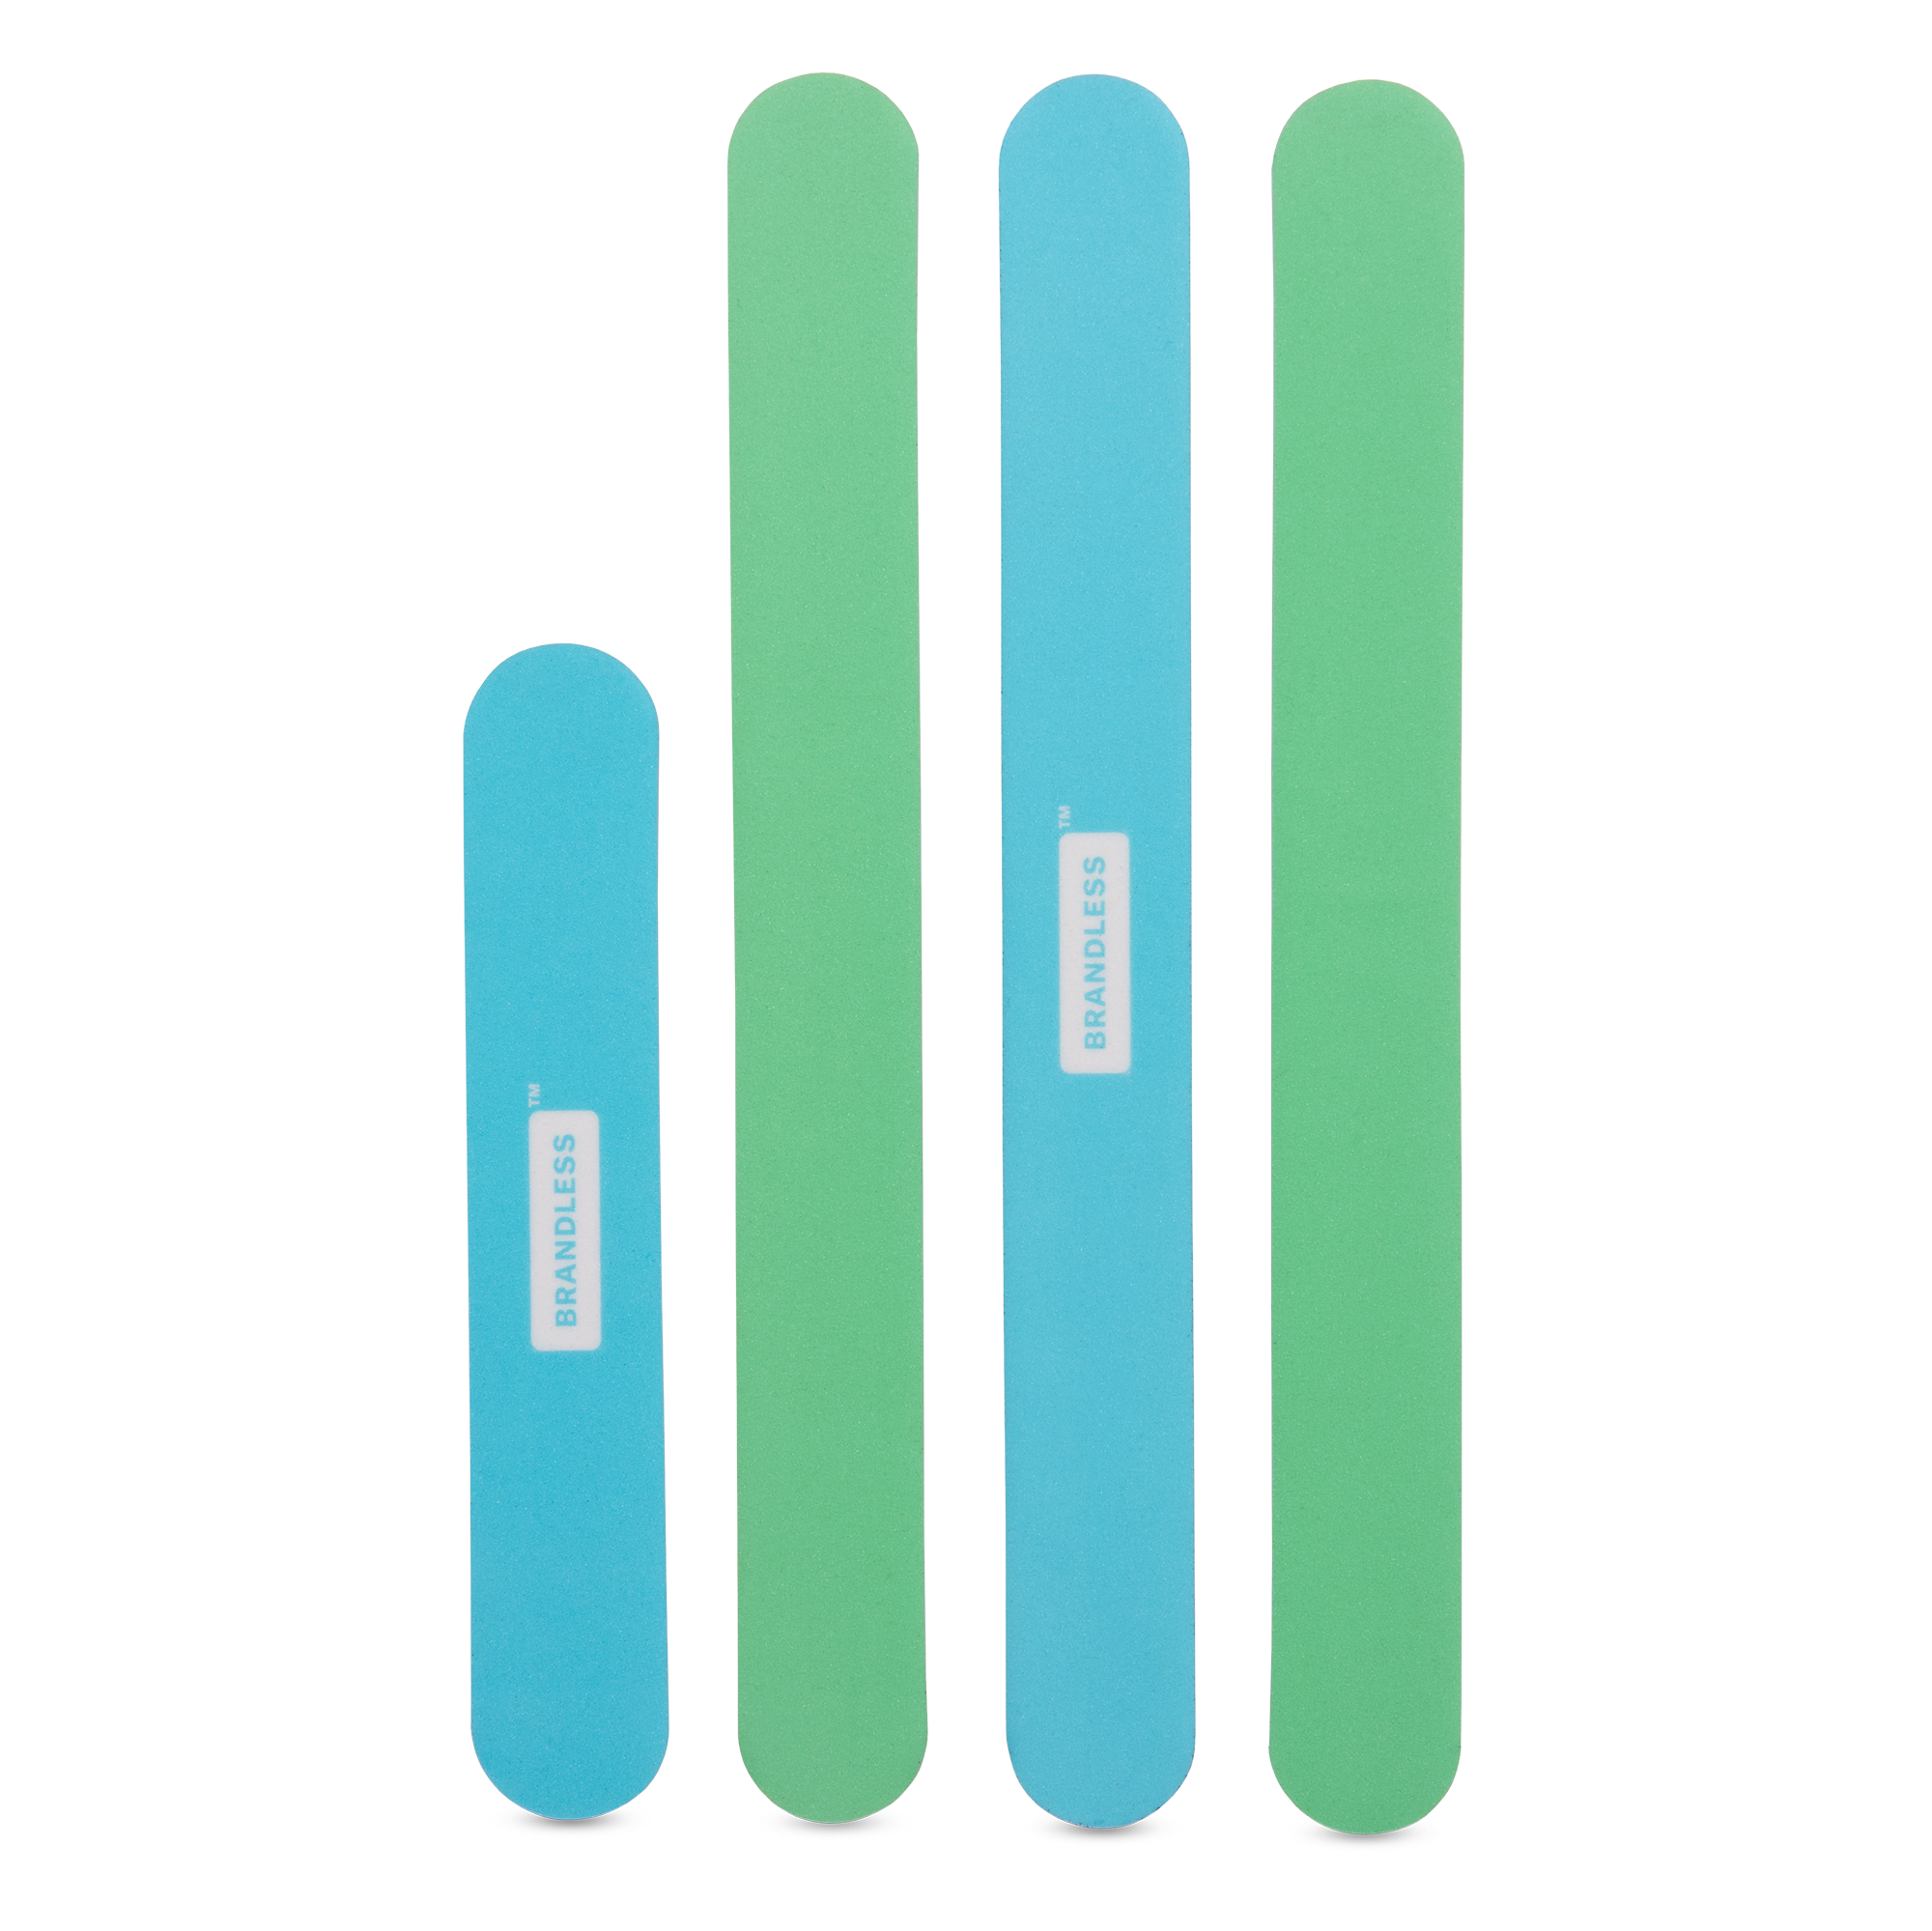 Emery Board Set, showing 3 tall and 1 short boards. Blue and green colors.